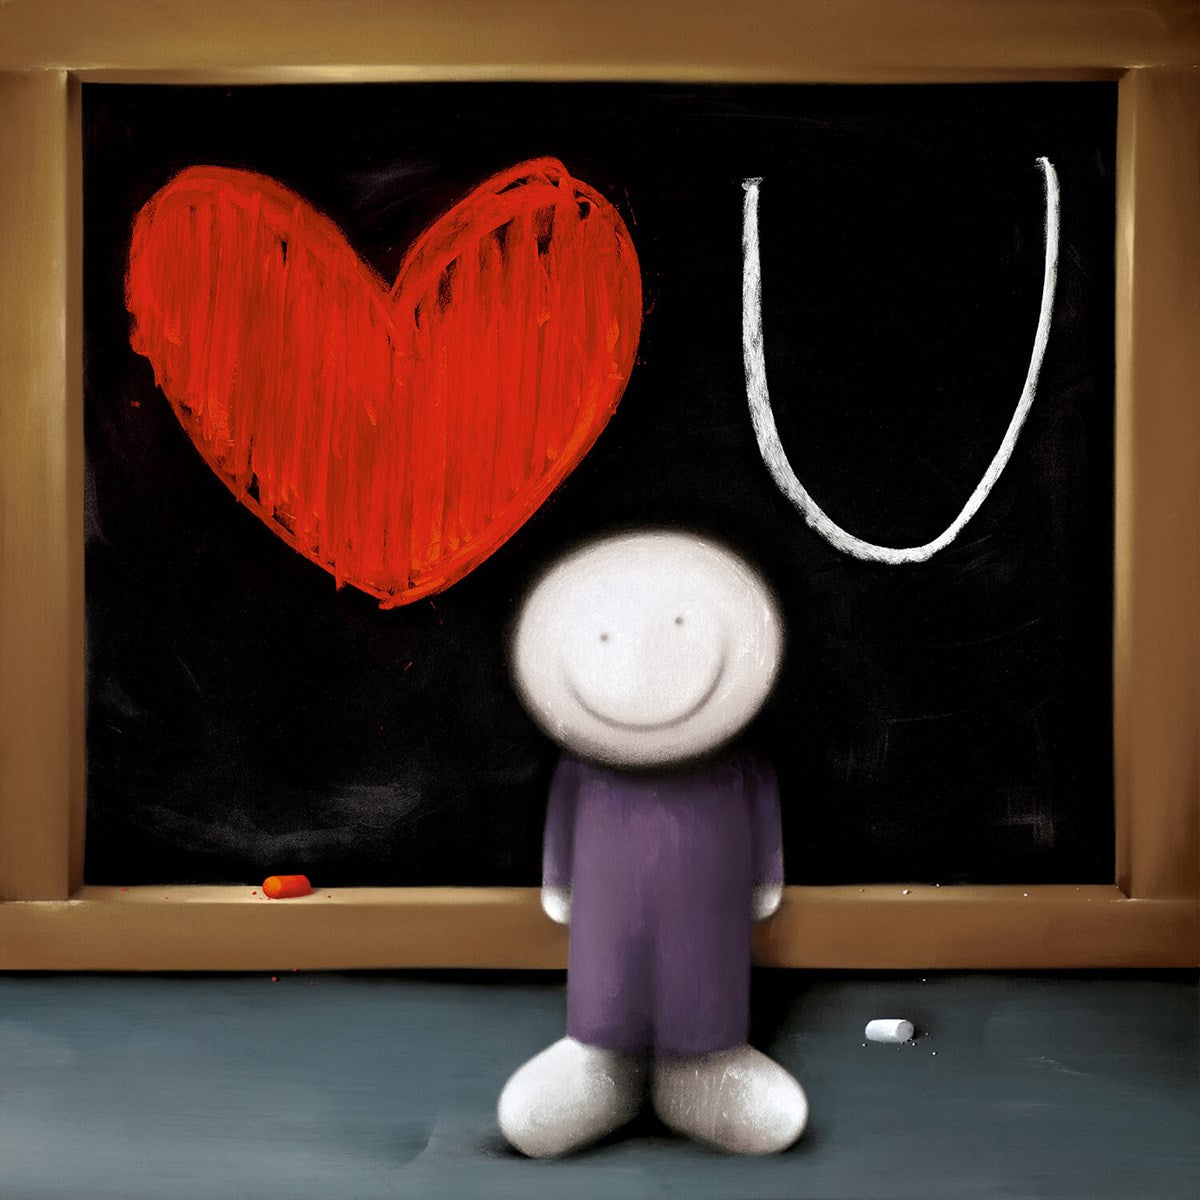 Love Letter limited edition framed print by Doug Hyde